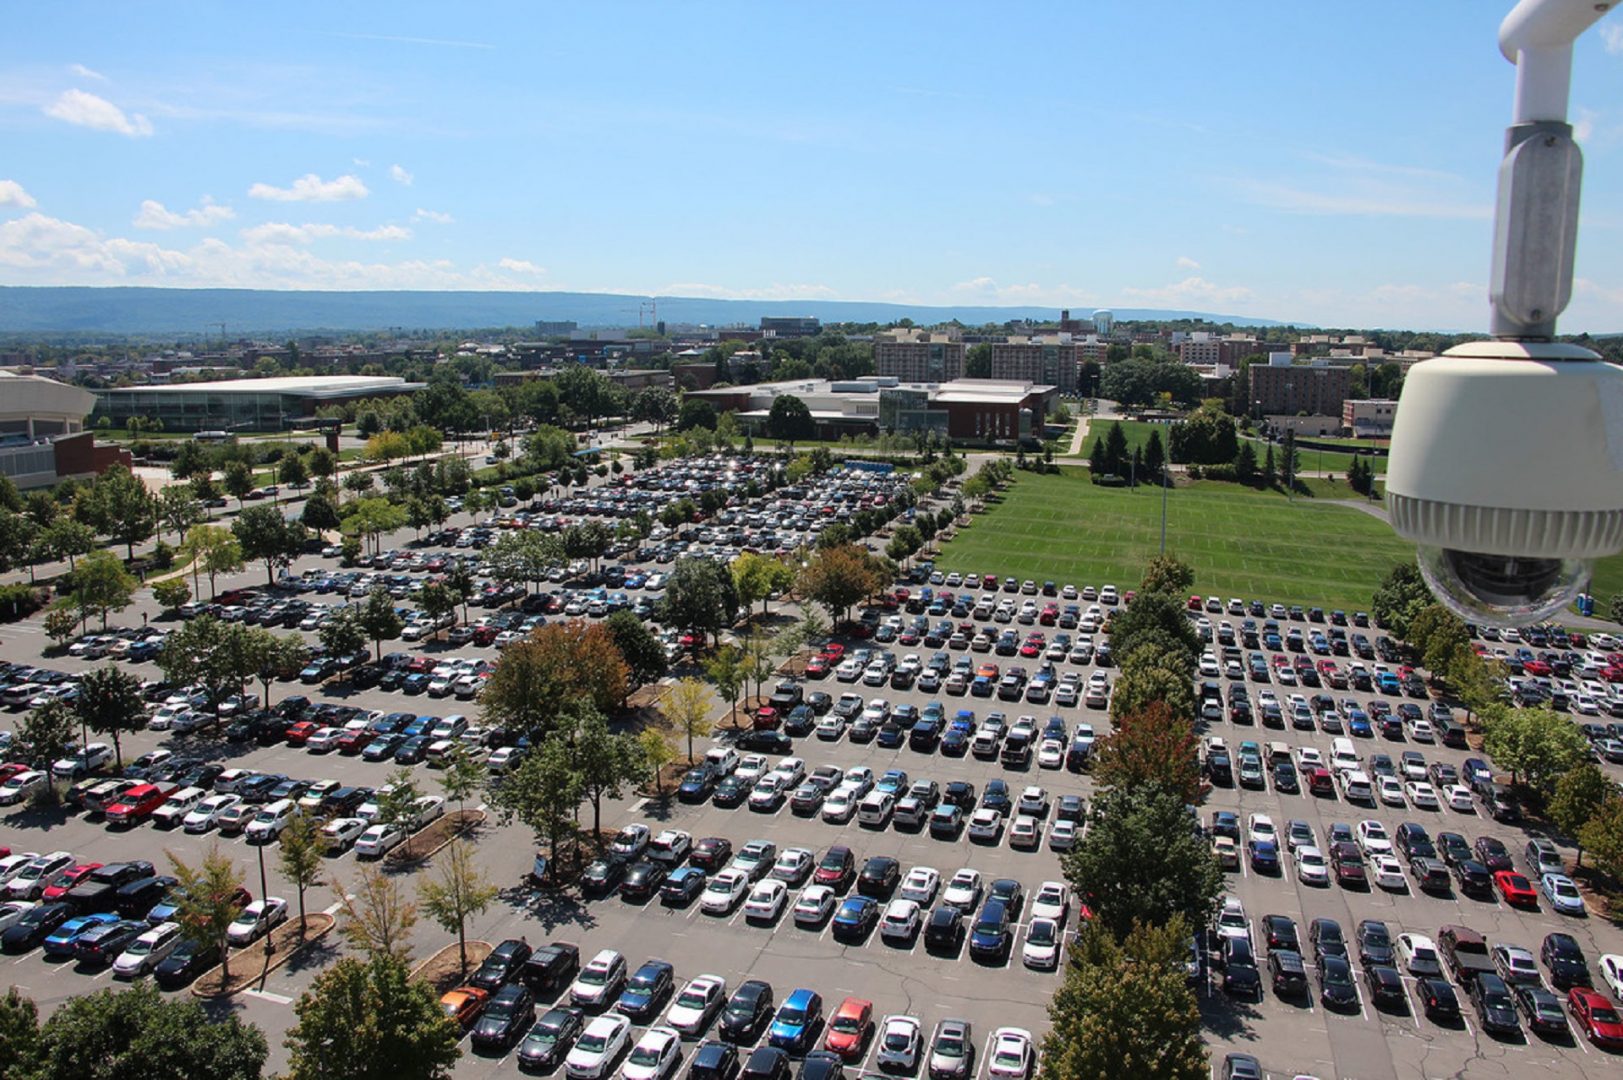 From the top of Beaver Stadium, one of the biggest stadiums in the world, it's possible to see just part of Penn State's central campus in State College.